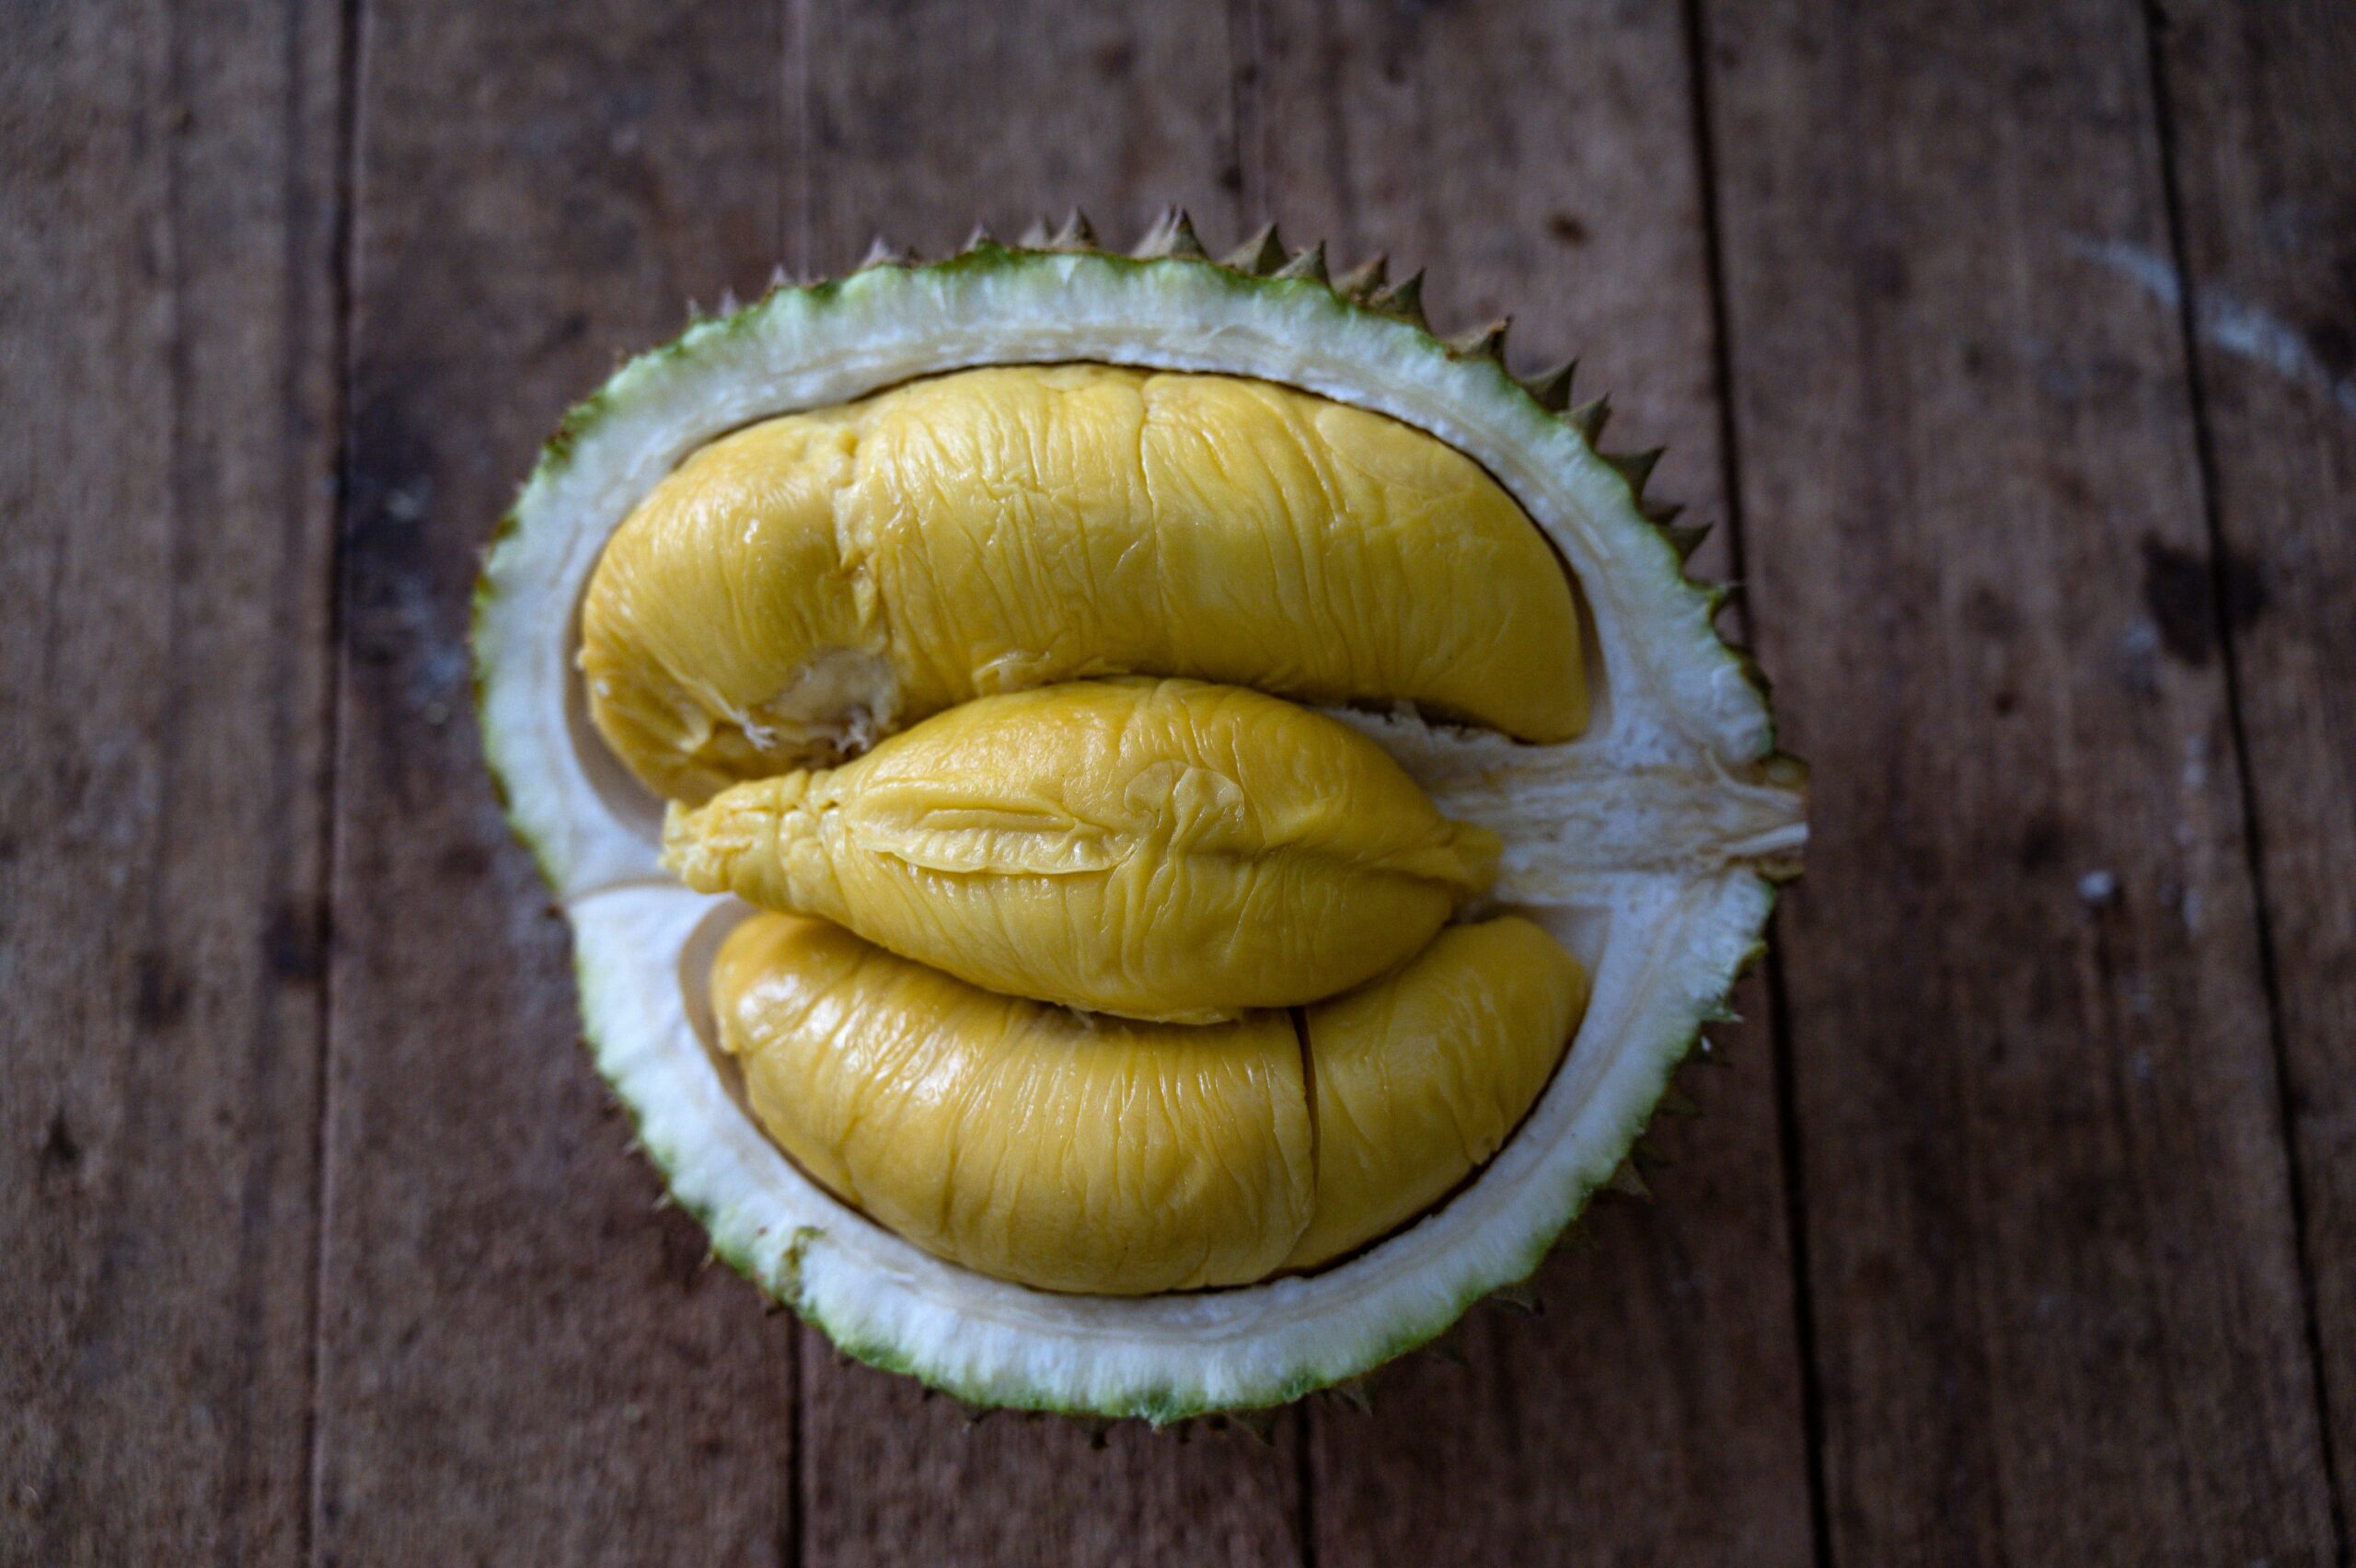 Singapore scientists turn durian husks into bandages